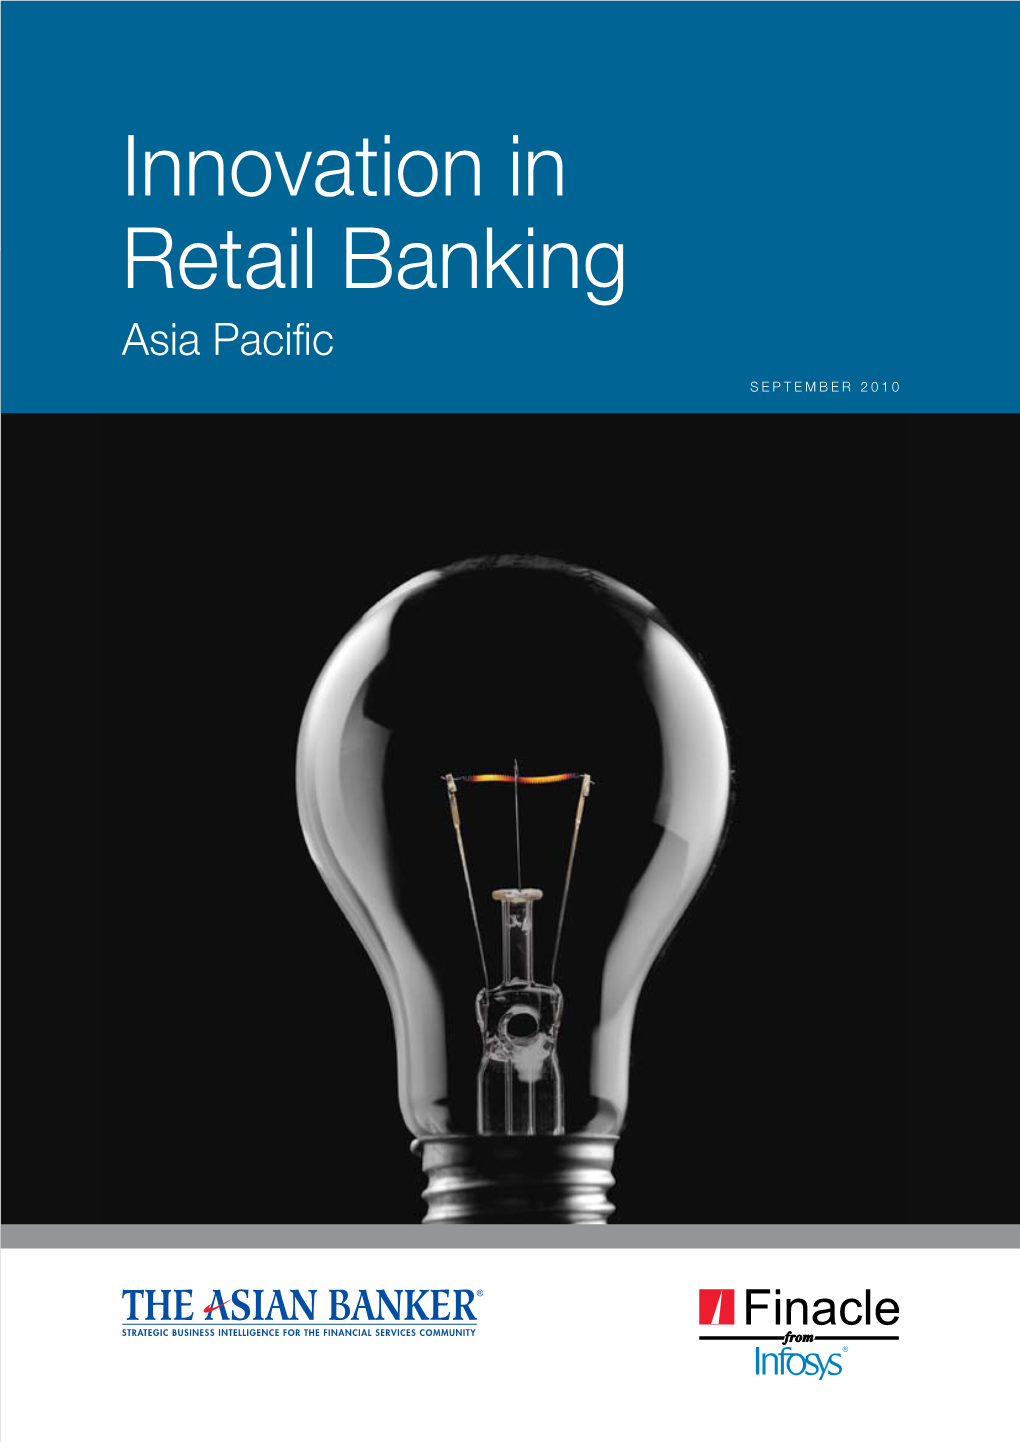 Innovation in Retail Banking Asia Pacific